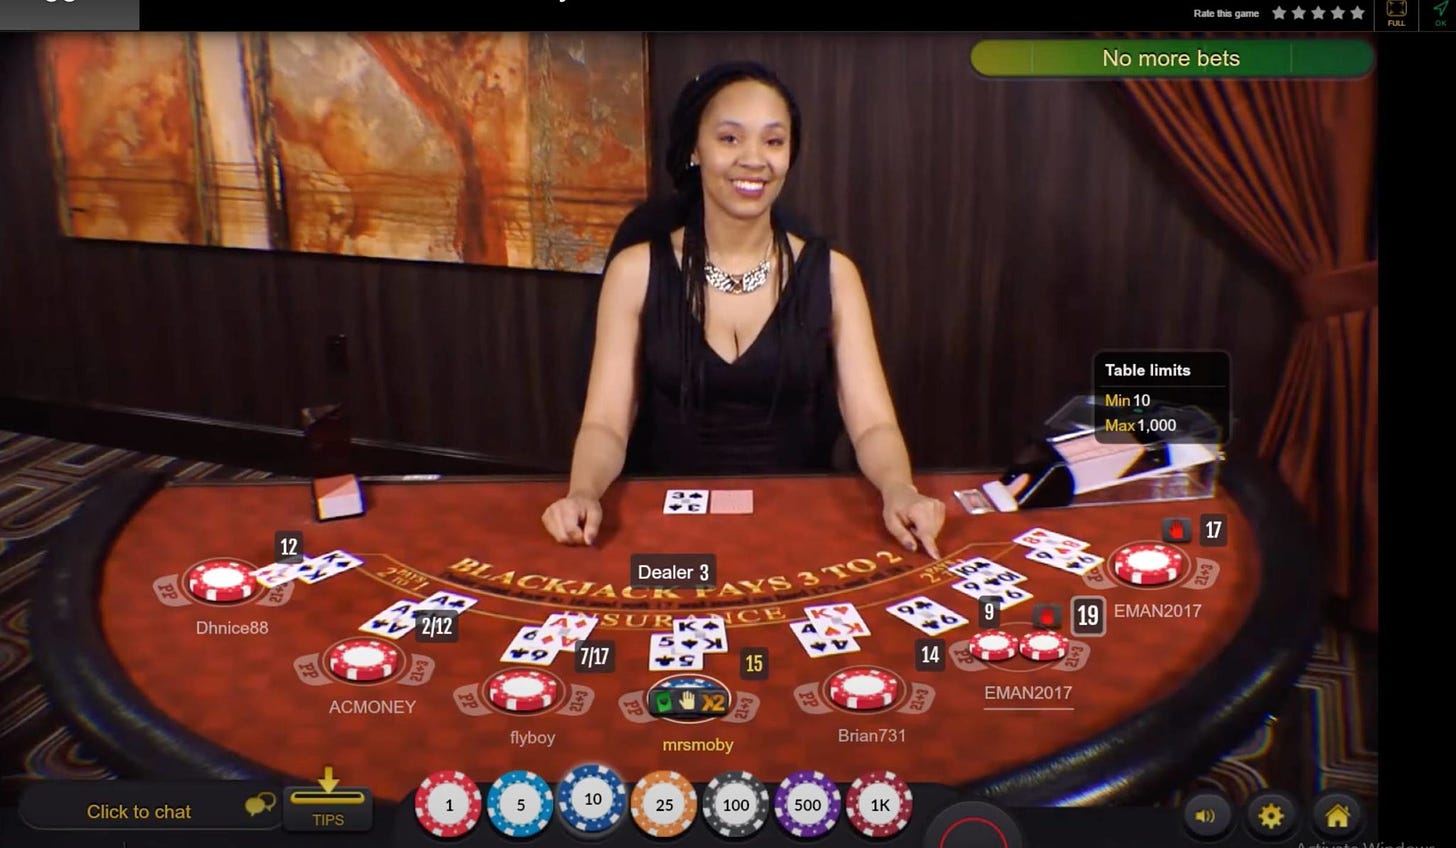 When Can PA Online Casino Players Expect Live Dealer Games?